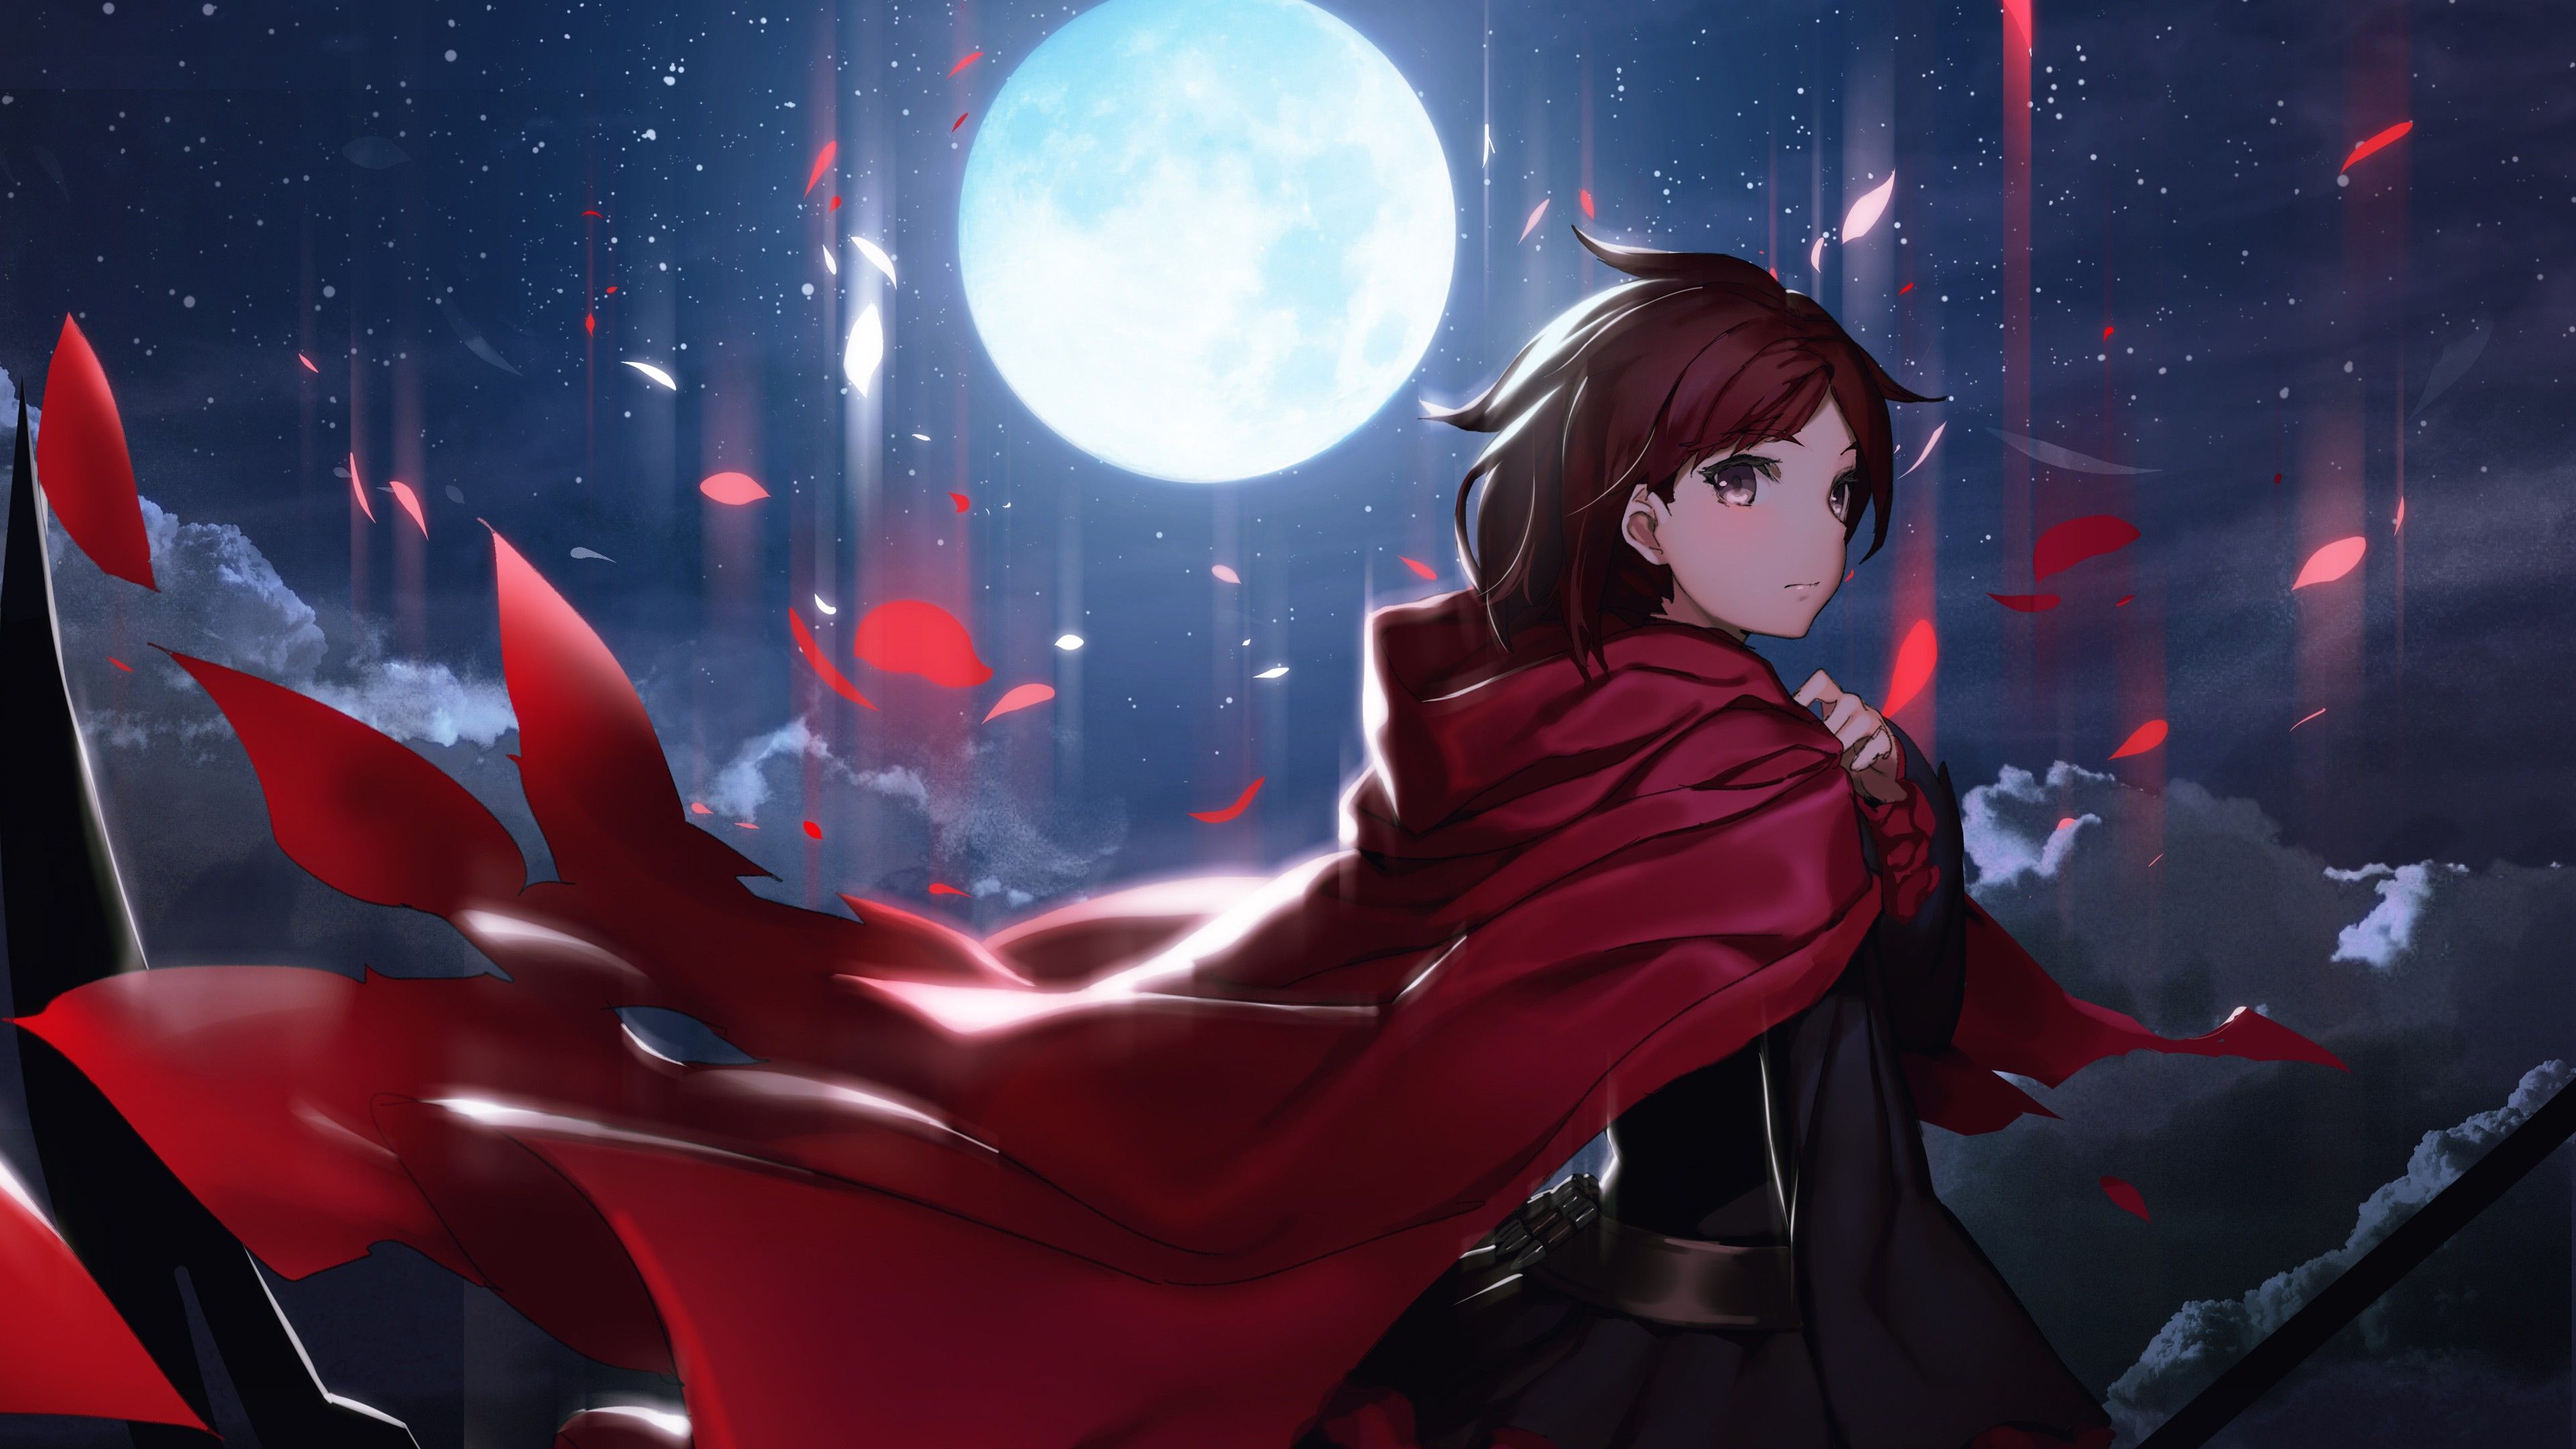 Ruby Rose on a background of the full moon anime RWBY Desktop wallpaper 1280x1024